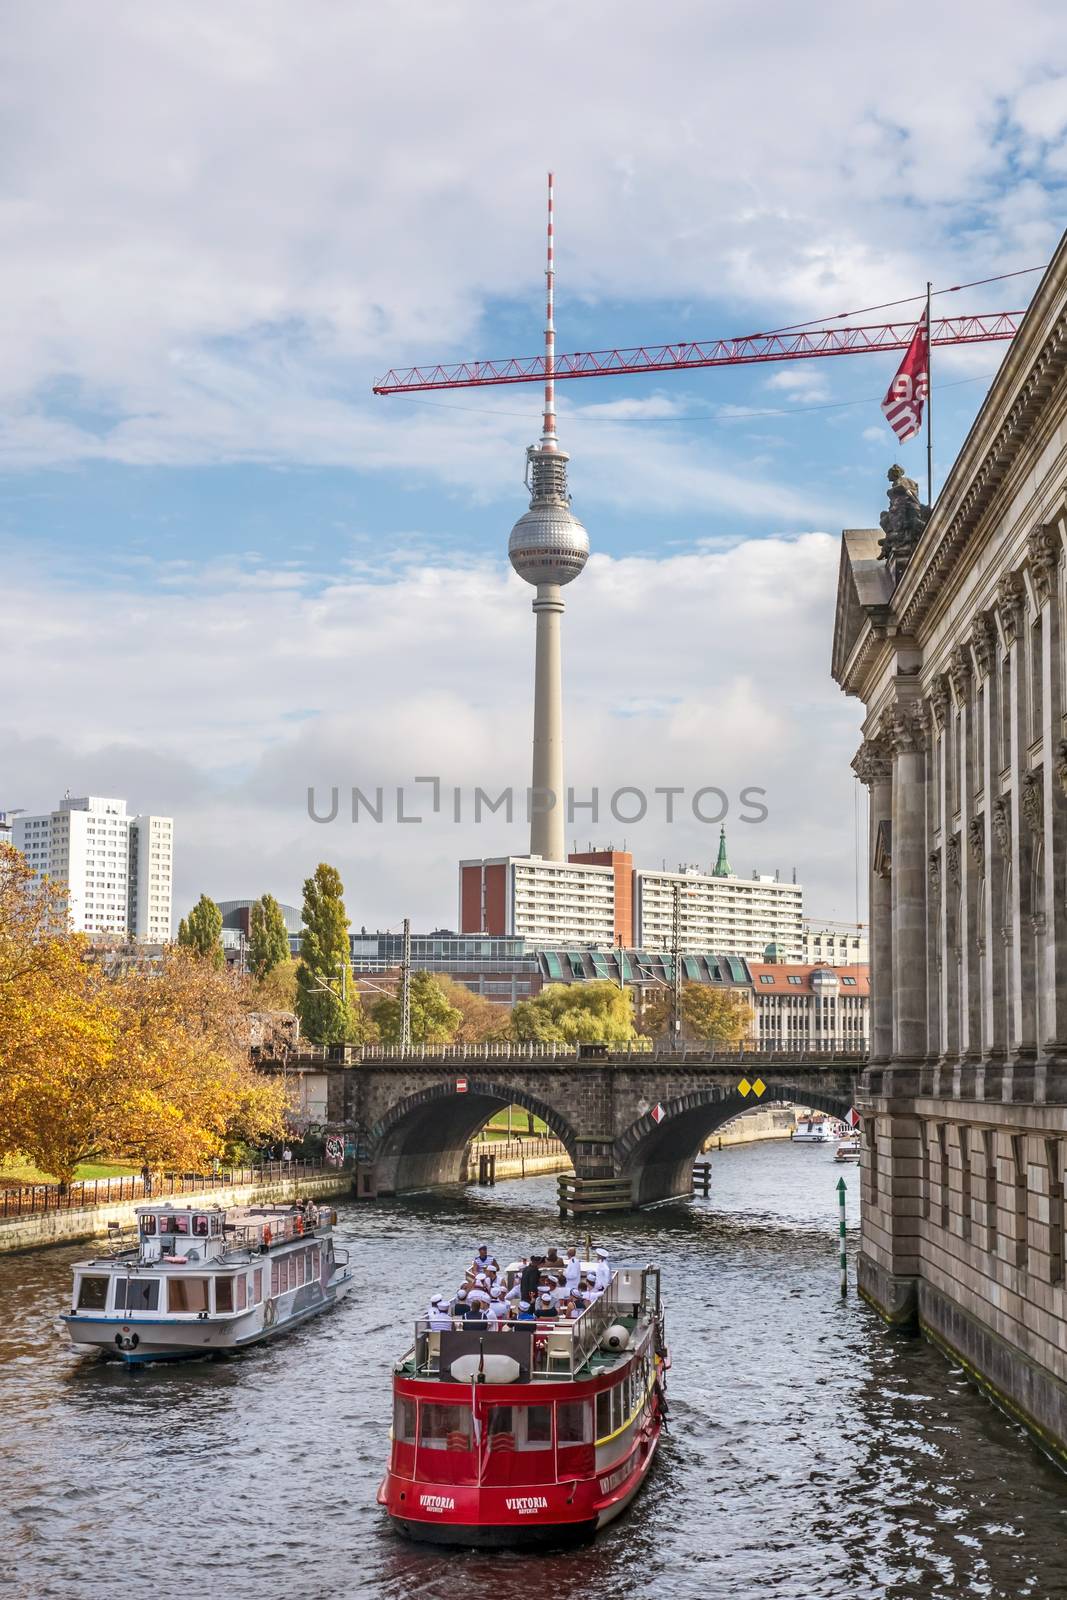 Berlin, Germany - October 26, 2013: Tourist boats on the Spree river - famous TV tower on Alexanderplatz square in the background.